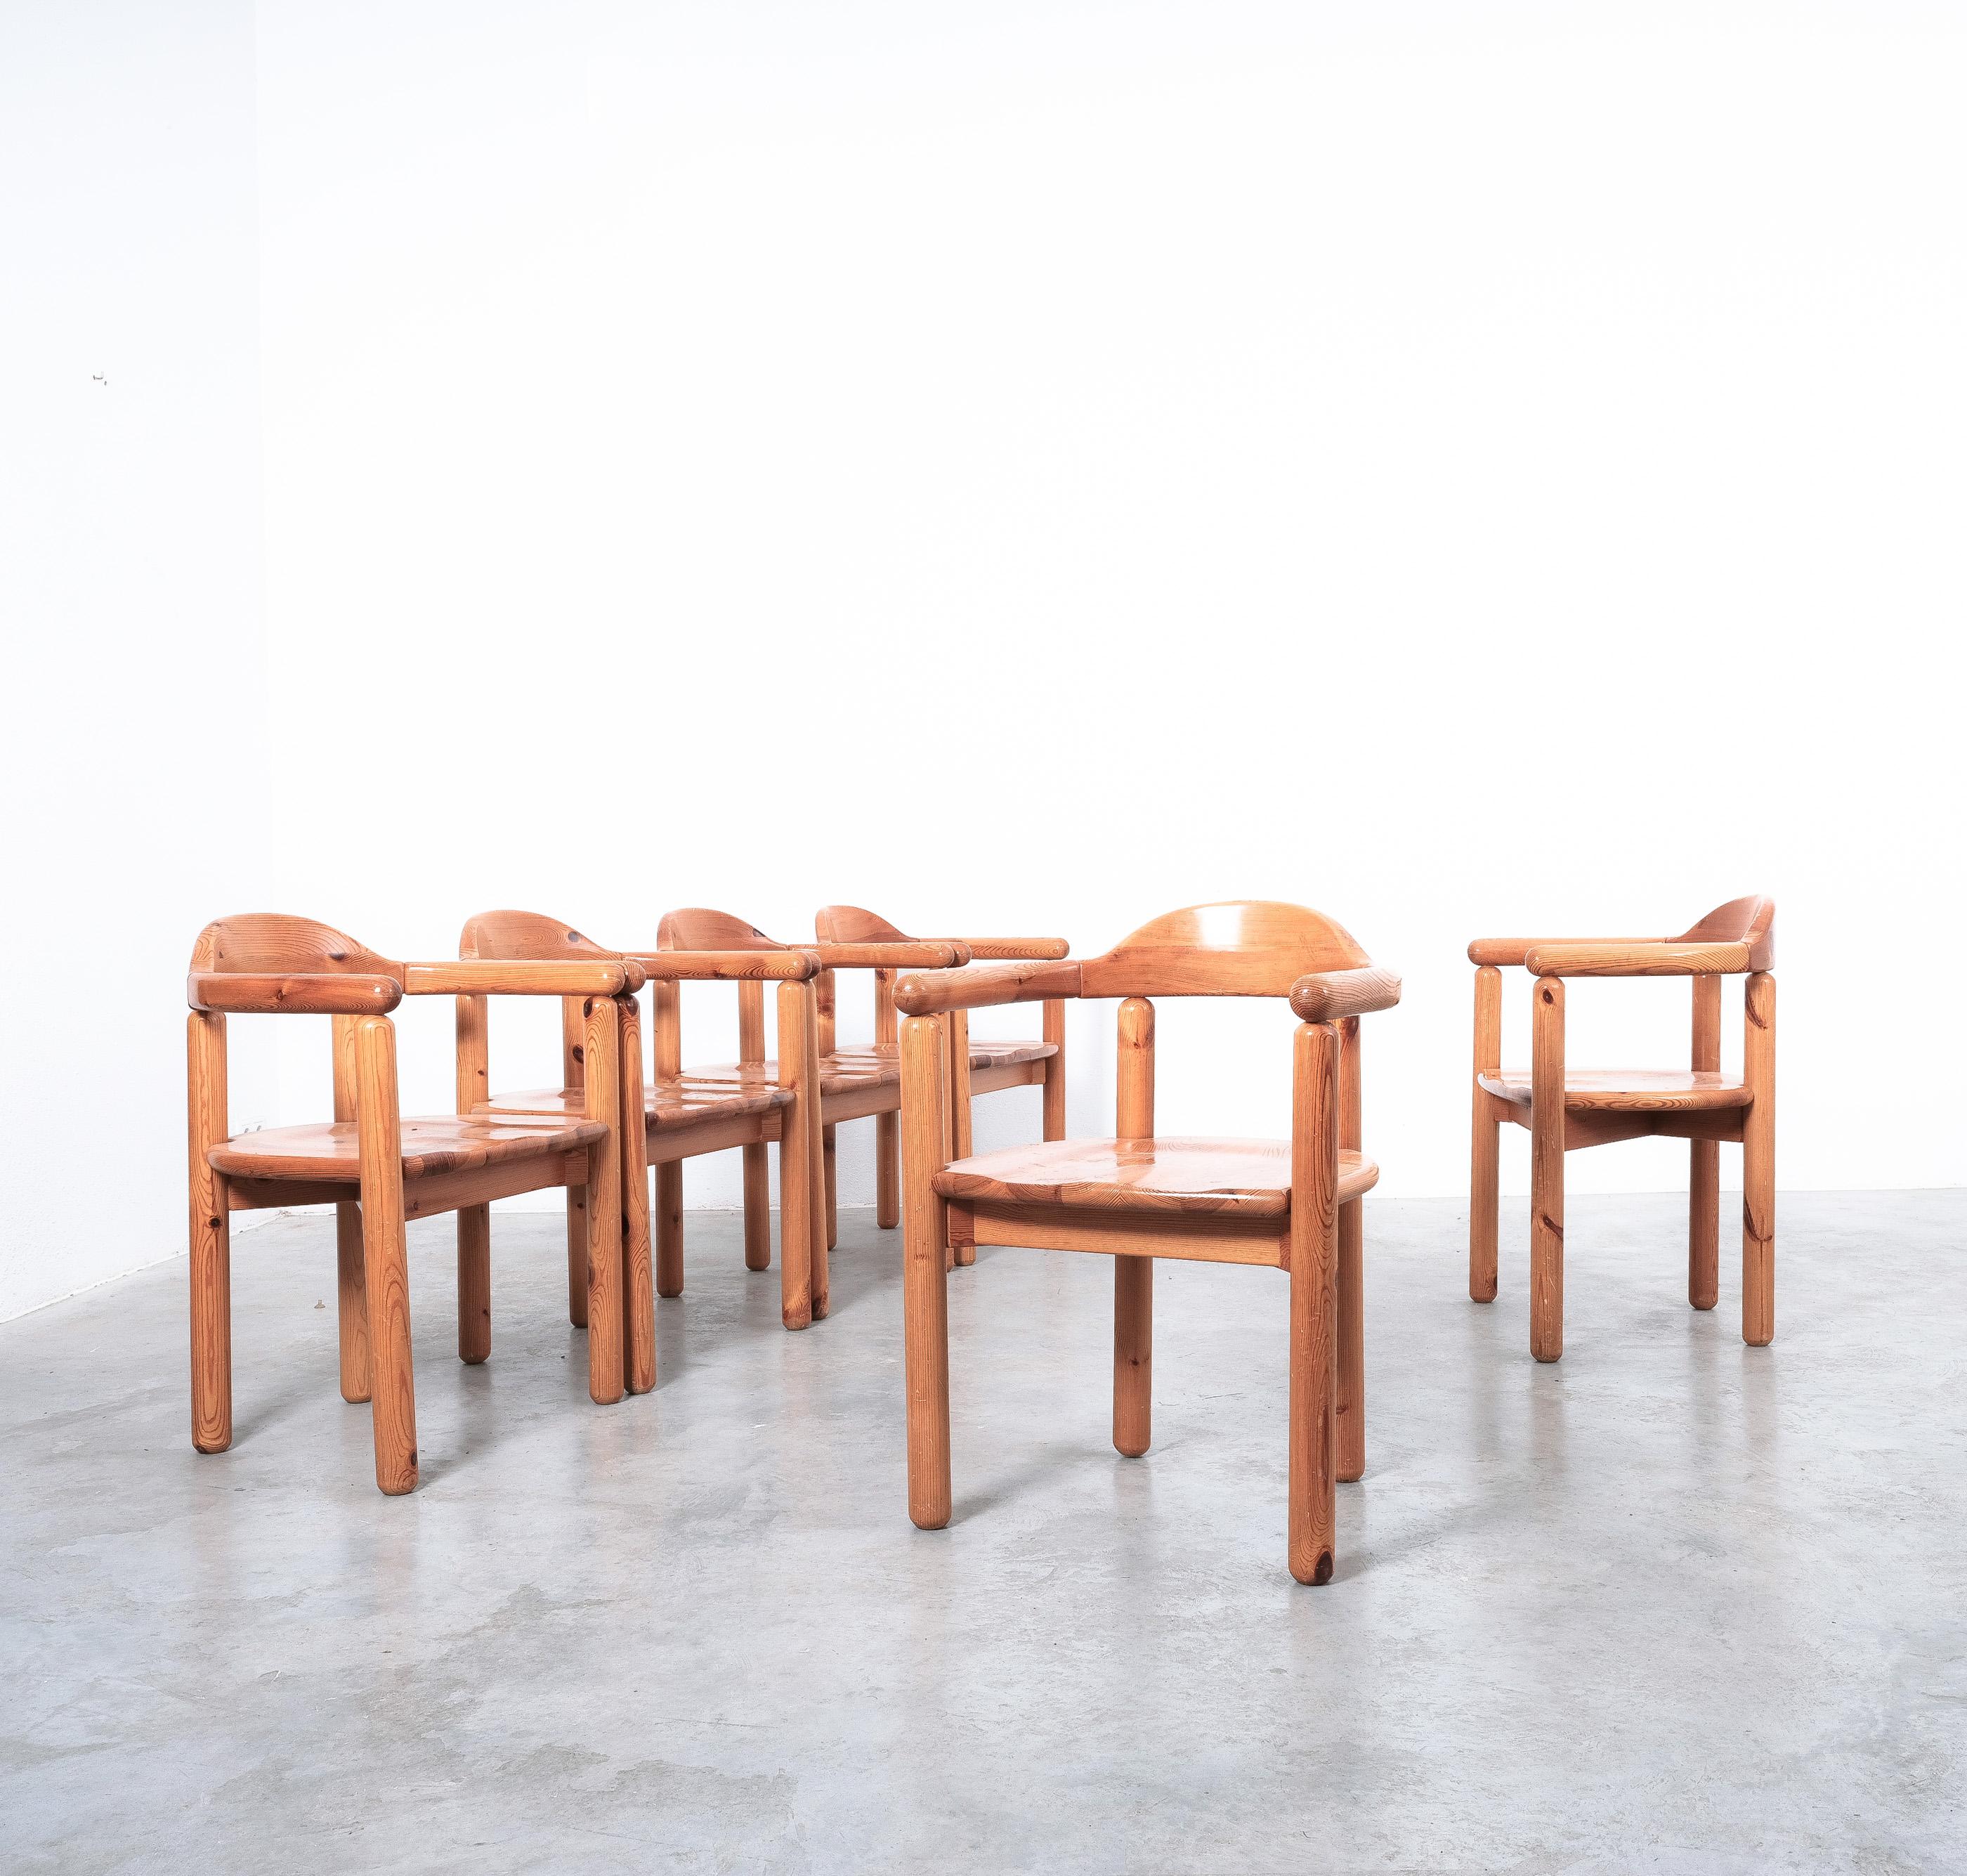 Rainer Daumiller Solid Pine Wood Dining Chairs '6' Danish Design, 1970 For Sale 7